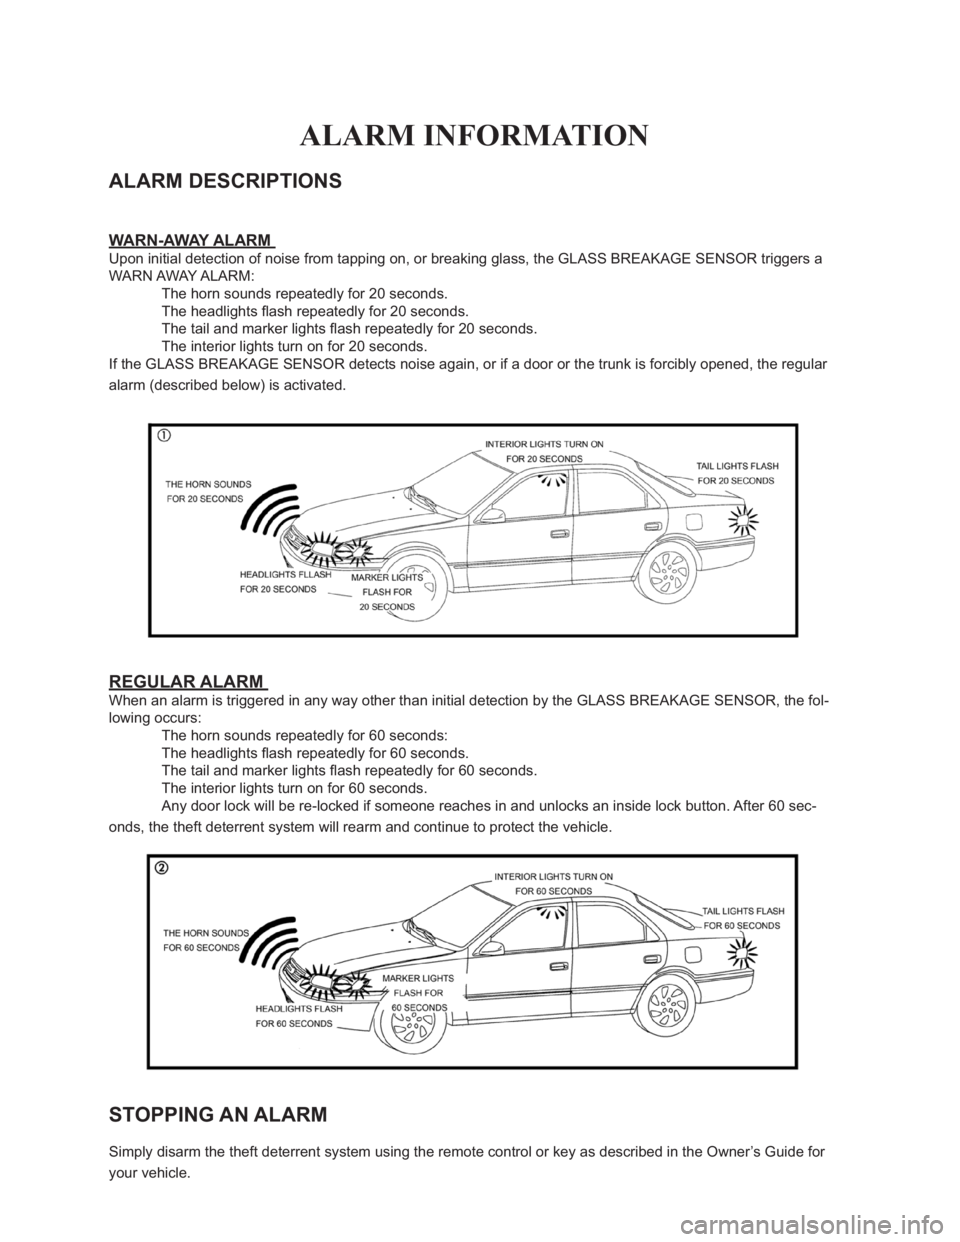 TOYOTA VENZA 2013  Accessories, Audio & Navigation (in English) ALARM INFORMATION
ALARM DESCRIPTIONS 
WARN-AWAY ALARM 
Upon initial detection of noise from tapping on, or breaking glass, the GLASS BREAKAGE SENSOR triggers a 
WARN AWAY ALARM: 
� �7�K�H��K�R�U�Q�